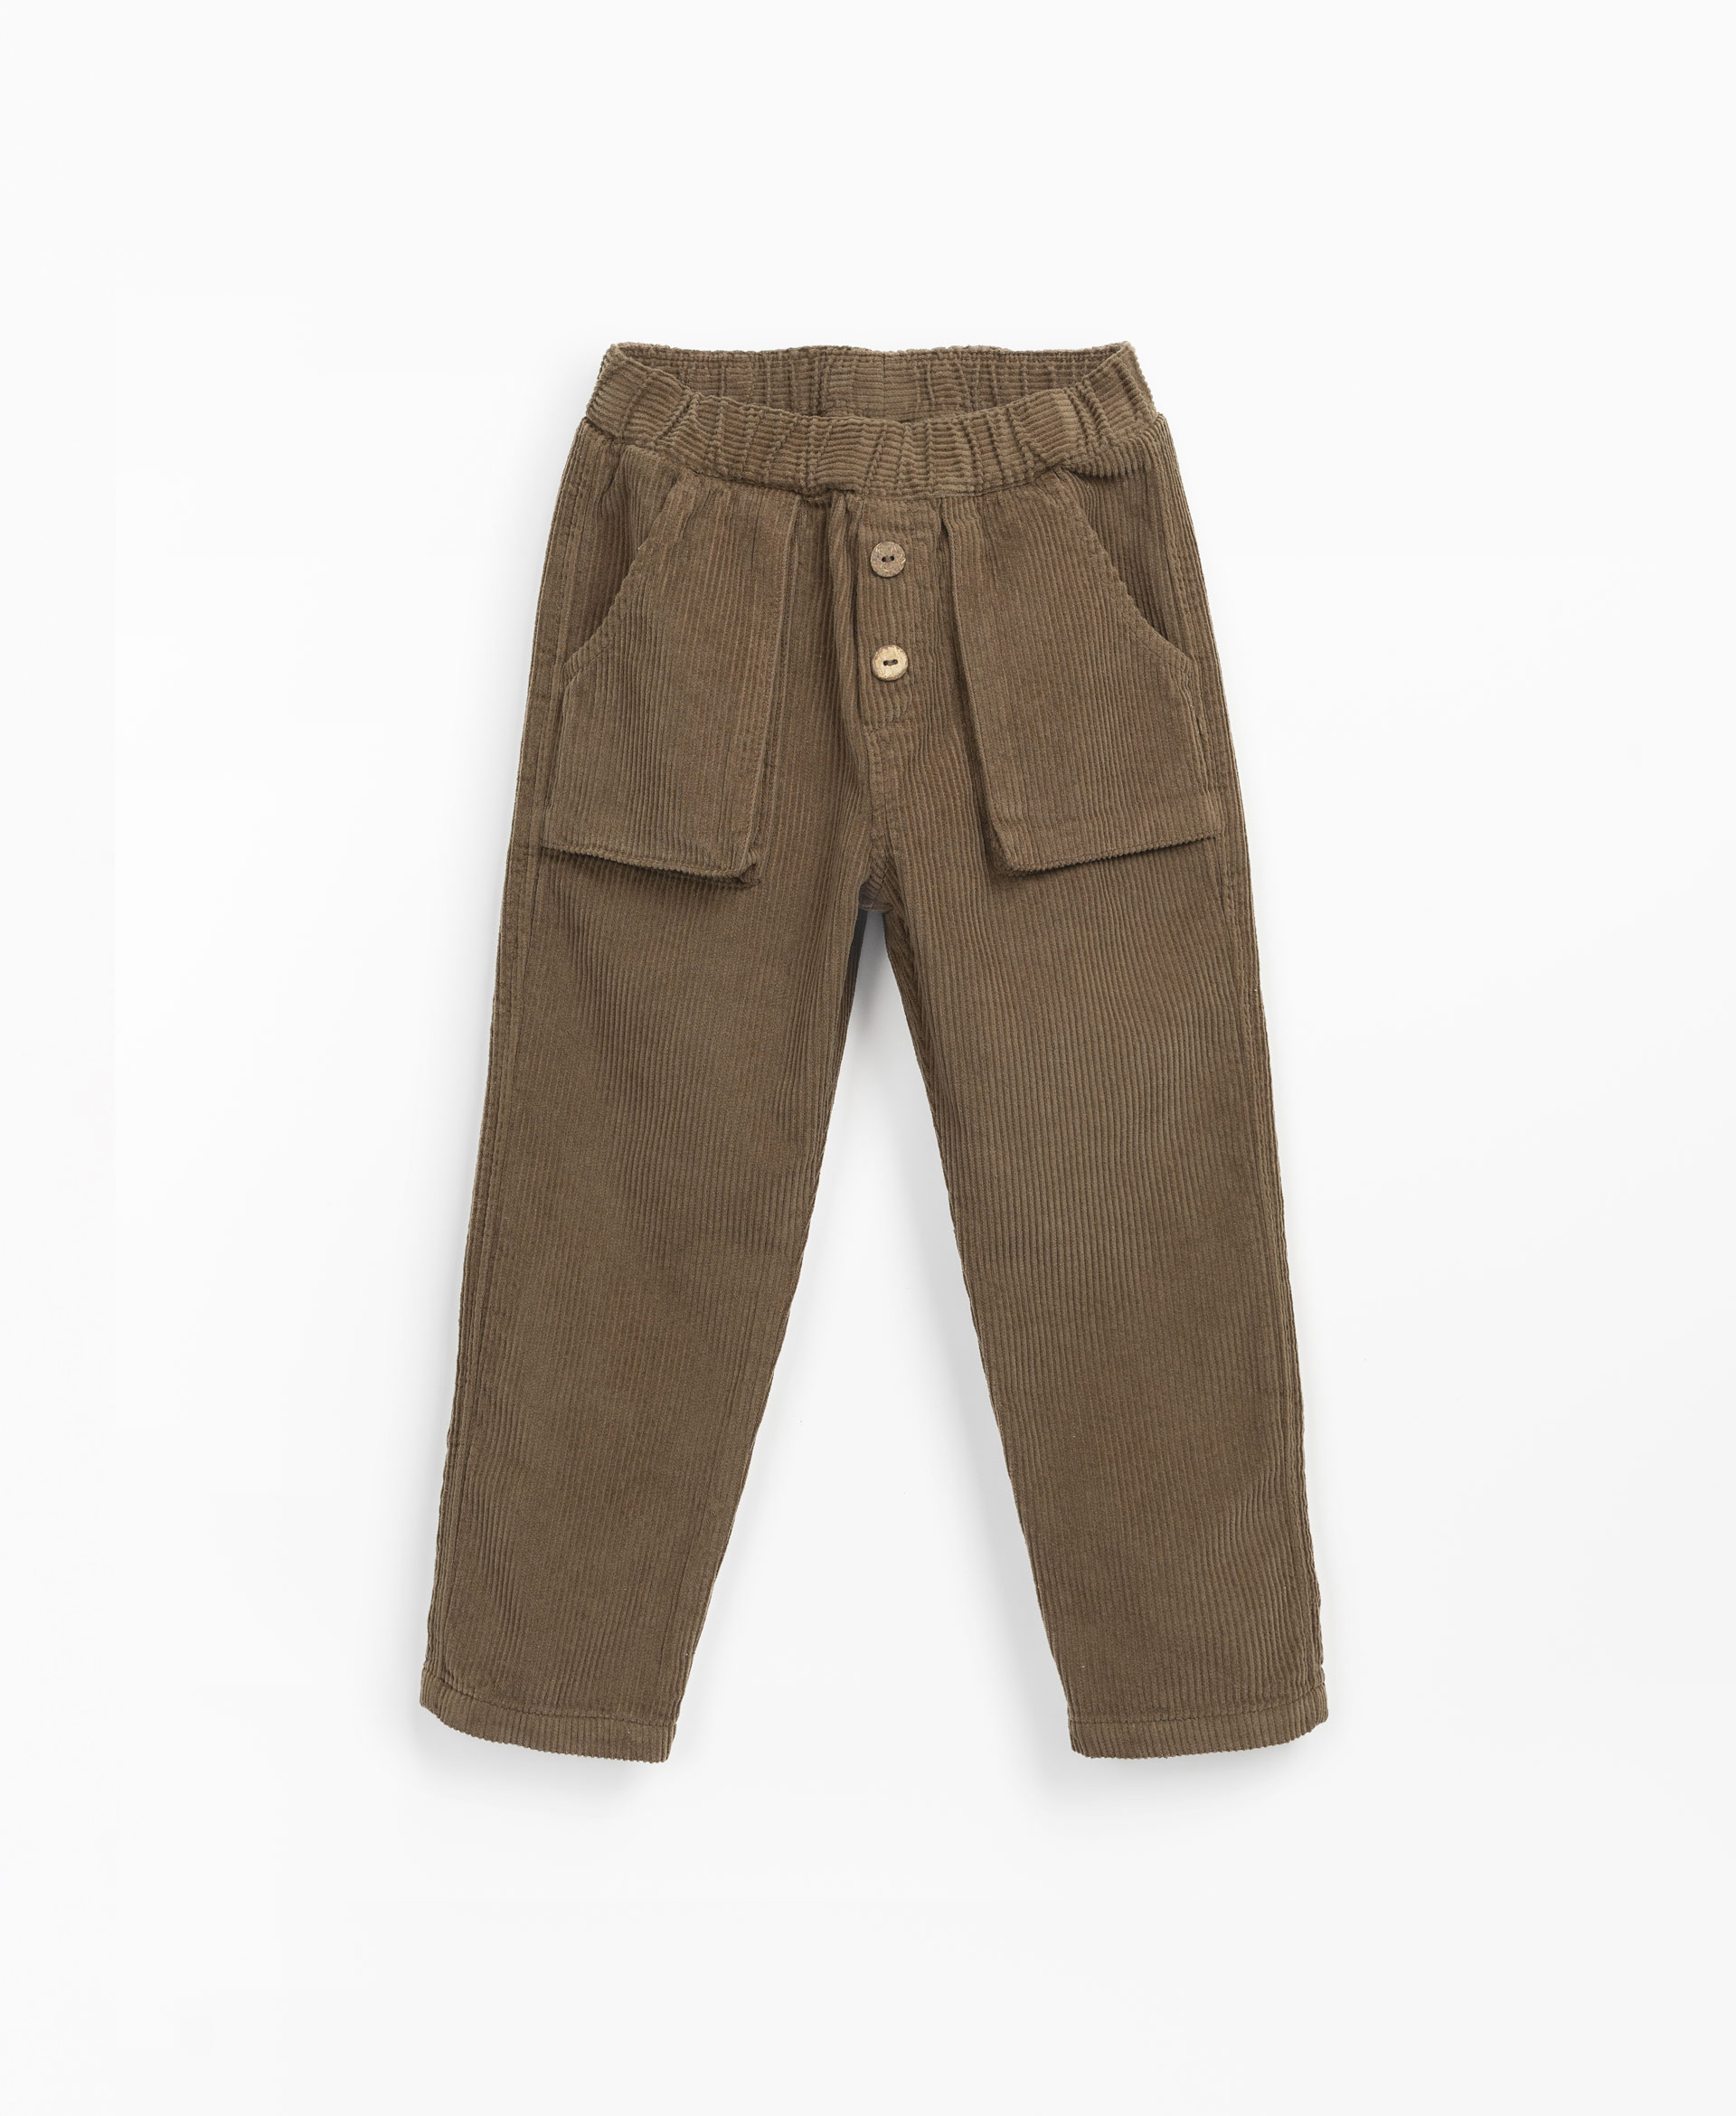 Men Khaki Stretchable Corduroy Structured Trouser Fabric at Rs 550/meter |  Corduroy in Ambala | ID: 2853155216397